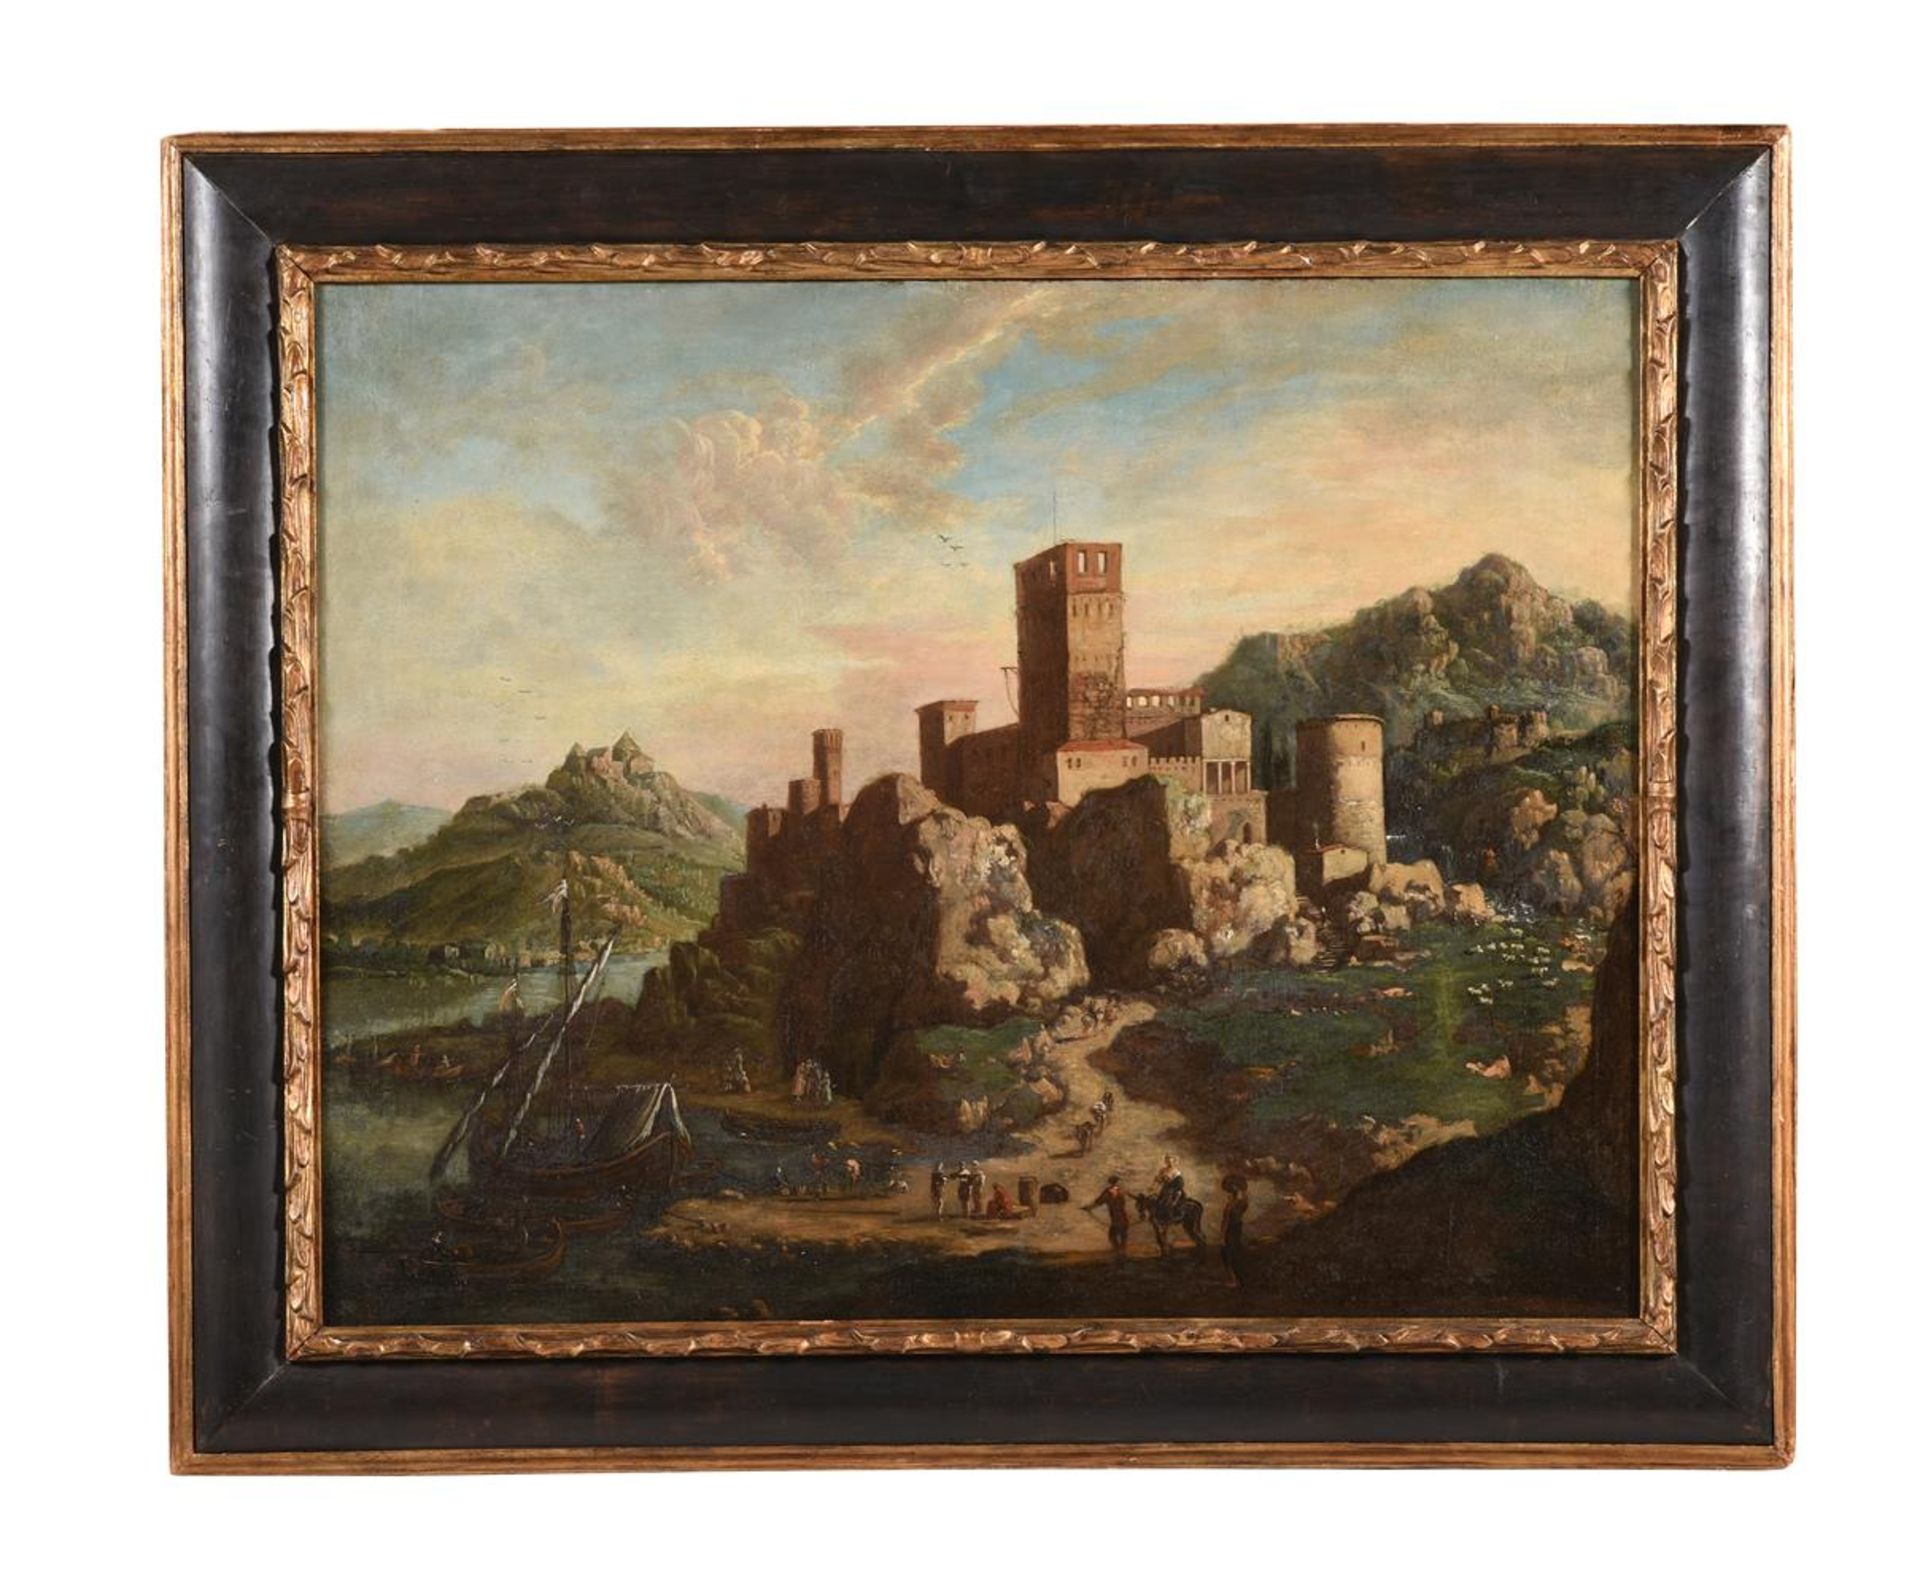 FOLLOWER OF PAUL BRILL (17TH CENTURY), AN ITALIANATE COASTAL INLET WITH A FORTIFIED HILLTOP TOWN